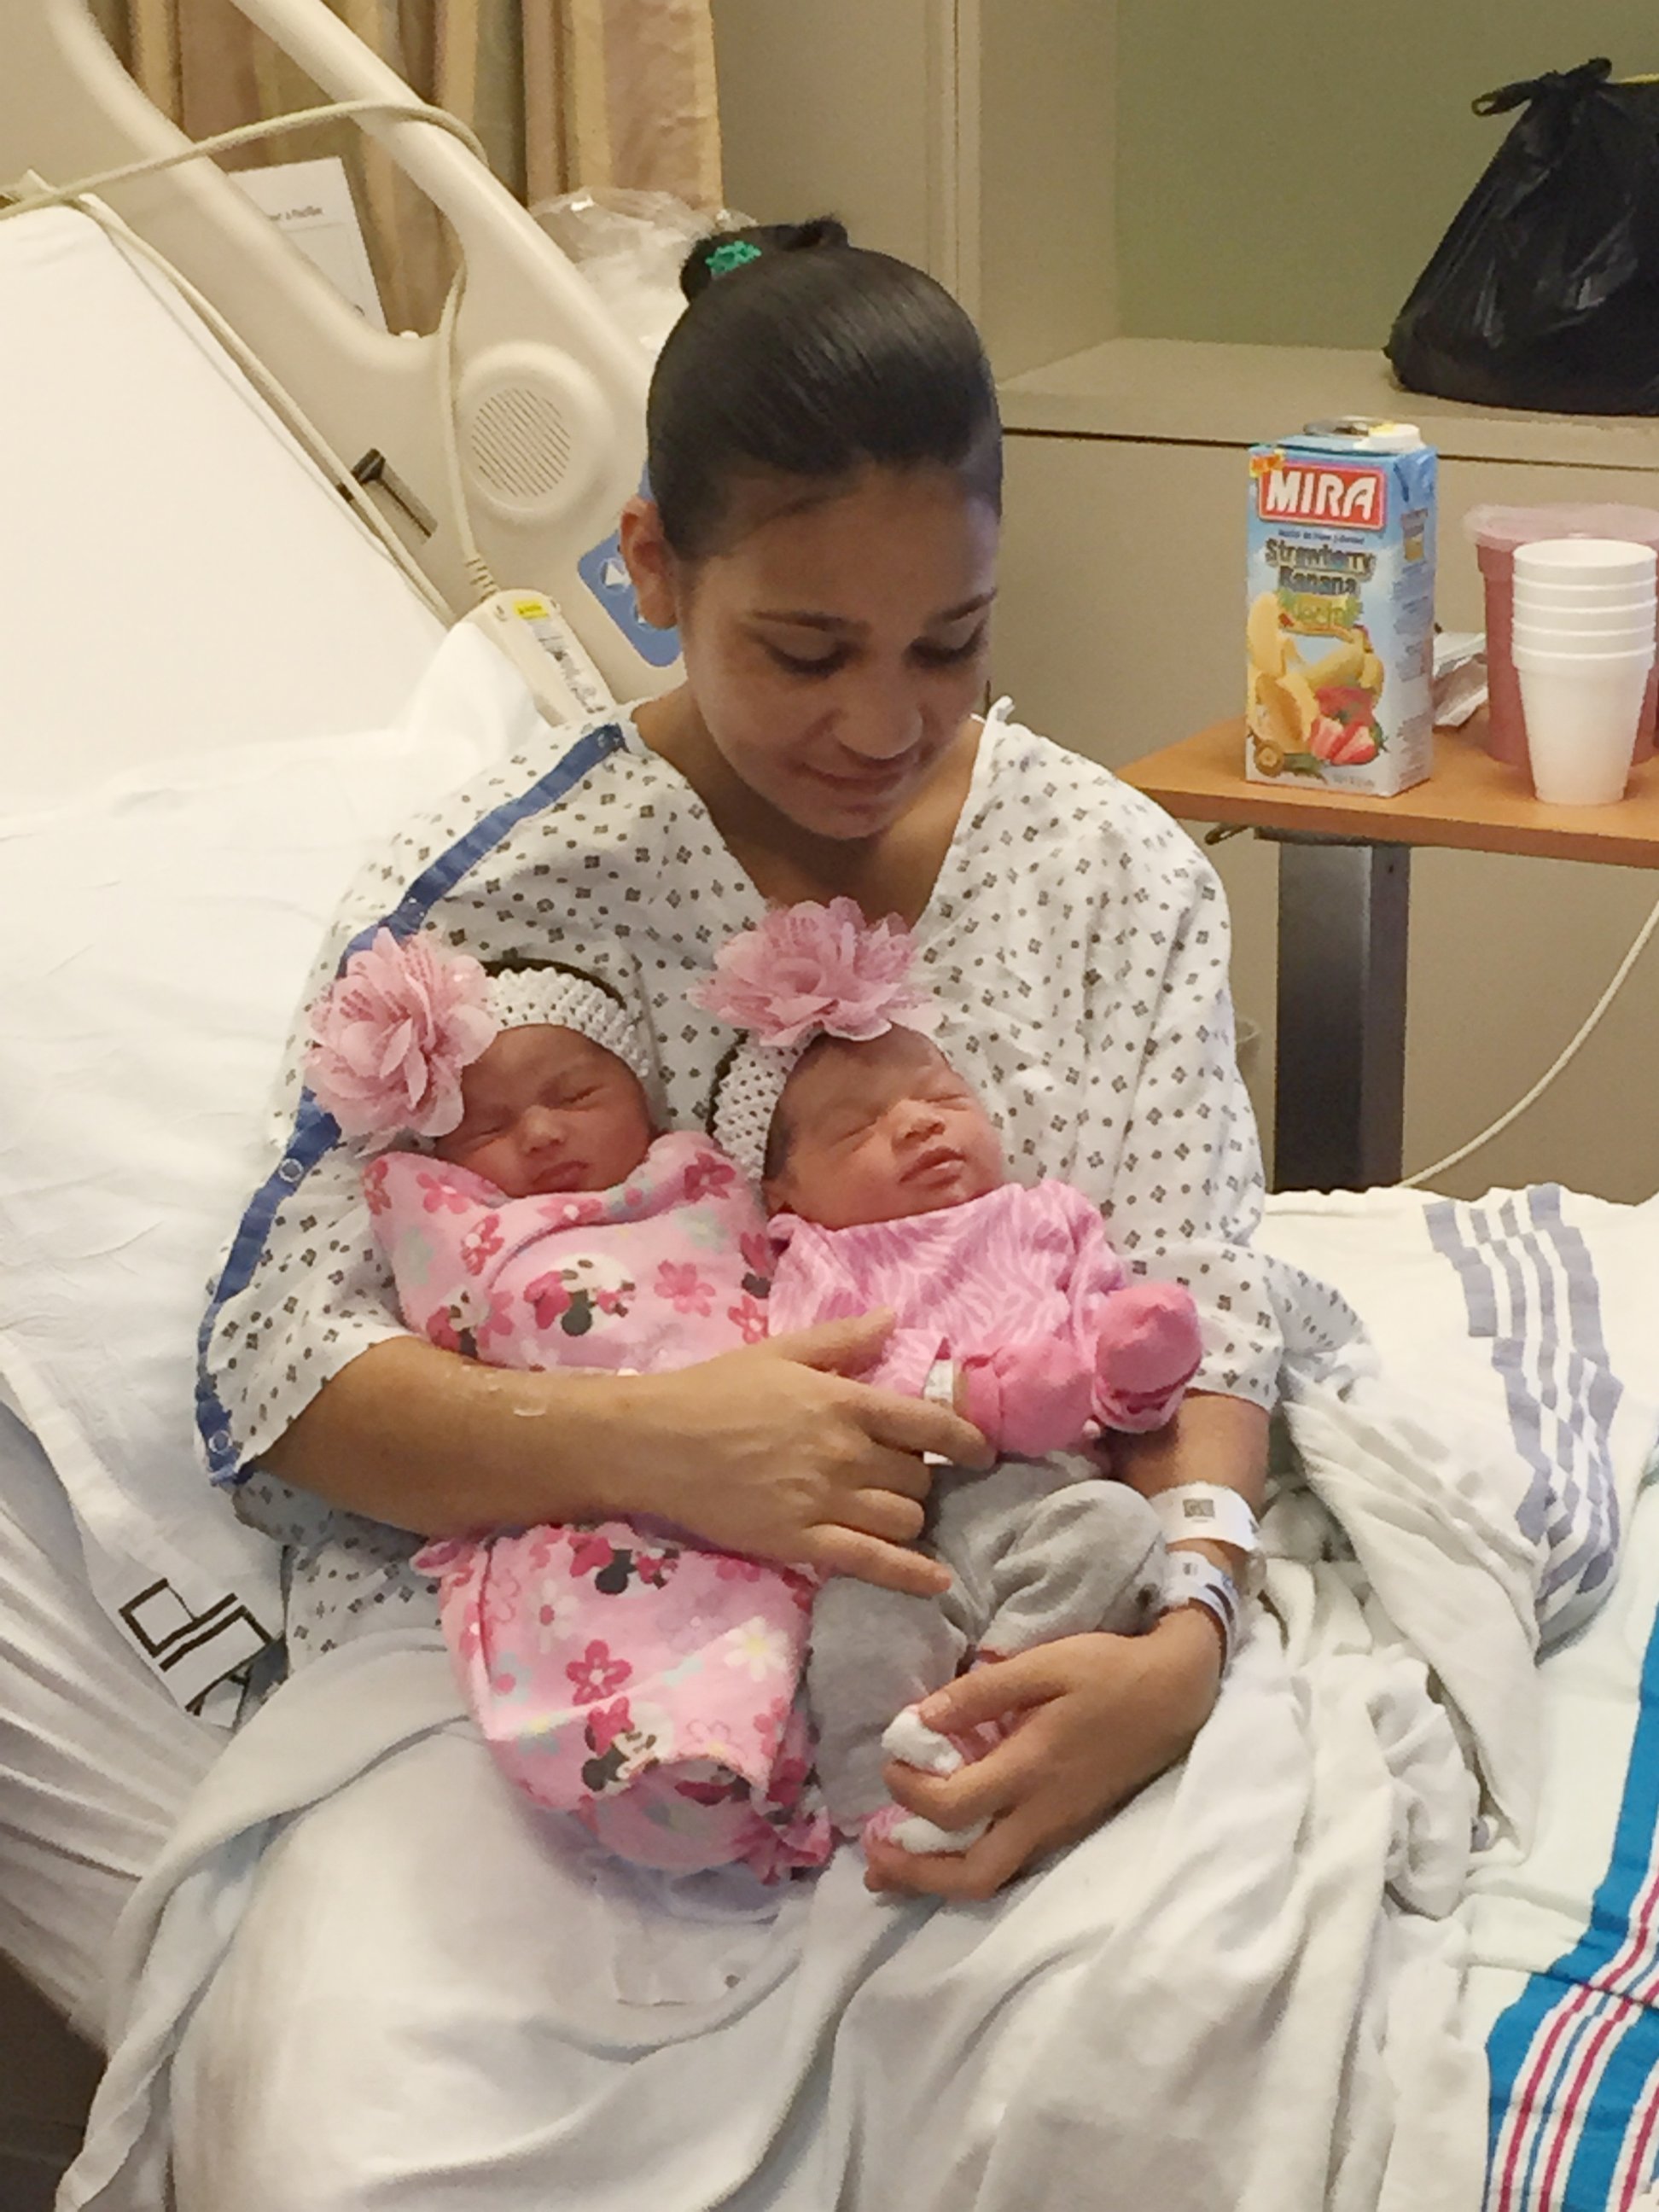 PHOTO: Yely Gonzalez and her twin sister Estefany, not pictured, gave birth to baby girls 15 minutes apart on Jan. 7, 2015.